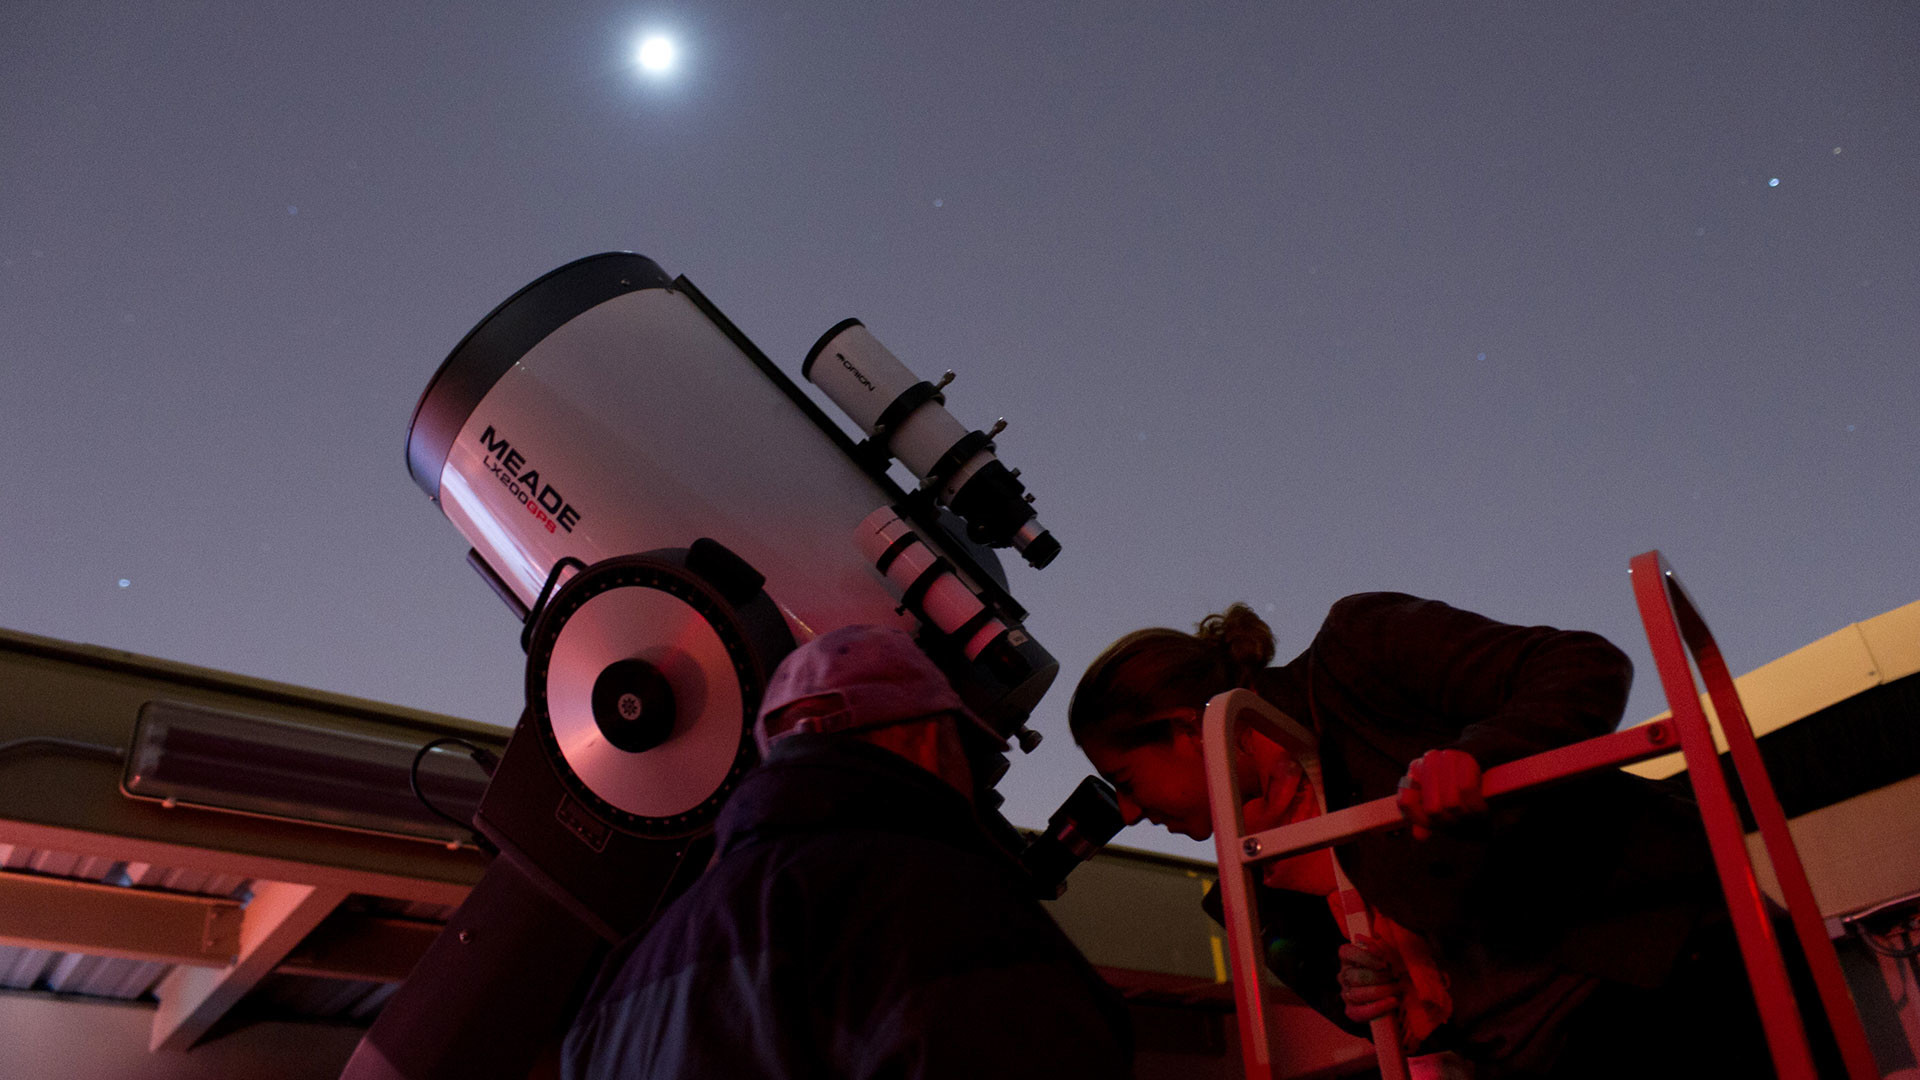 Photo – Meade telescope at dusk in the Georgia Tech observatory